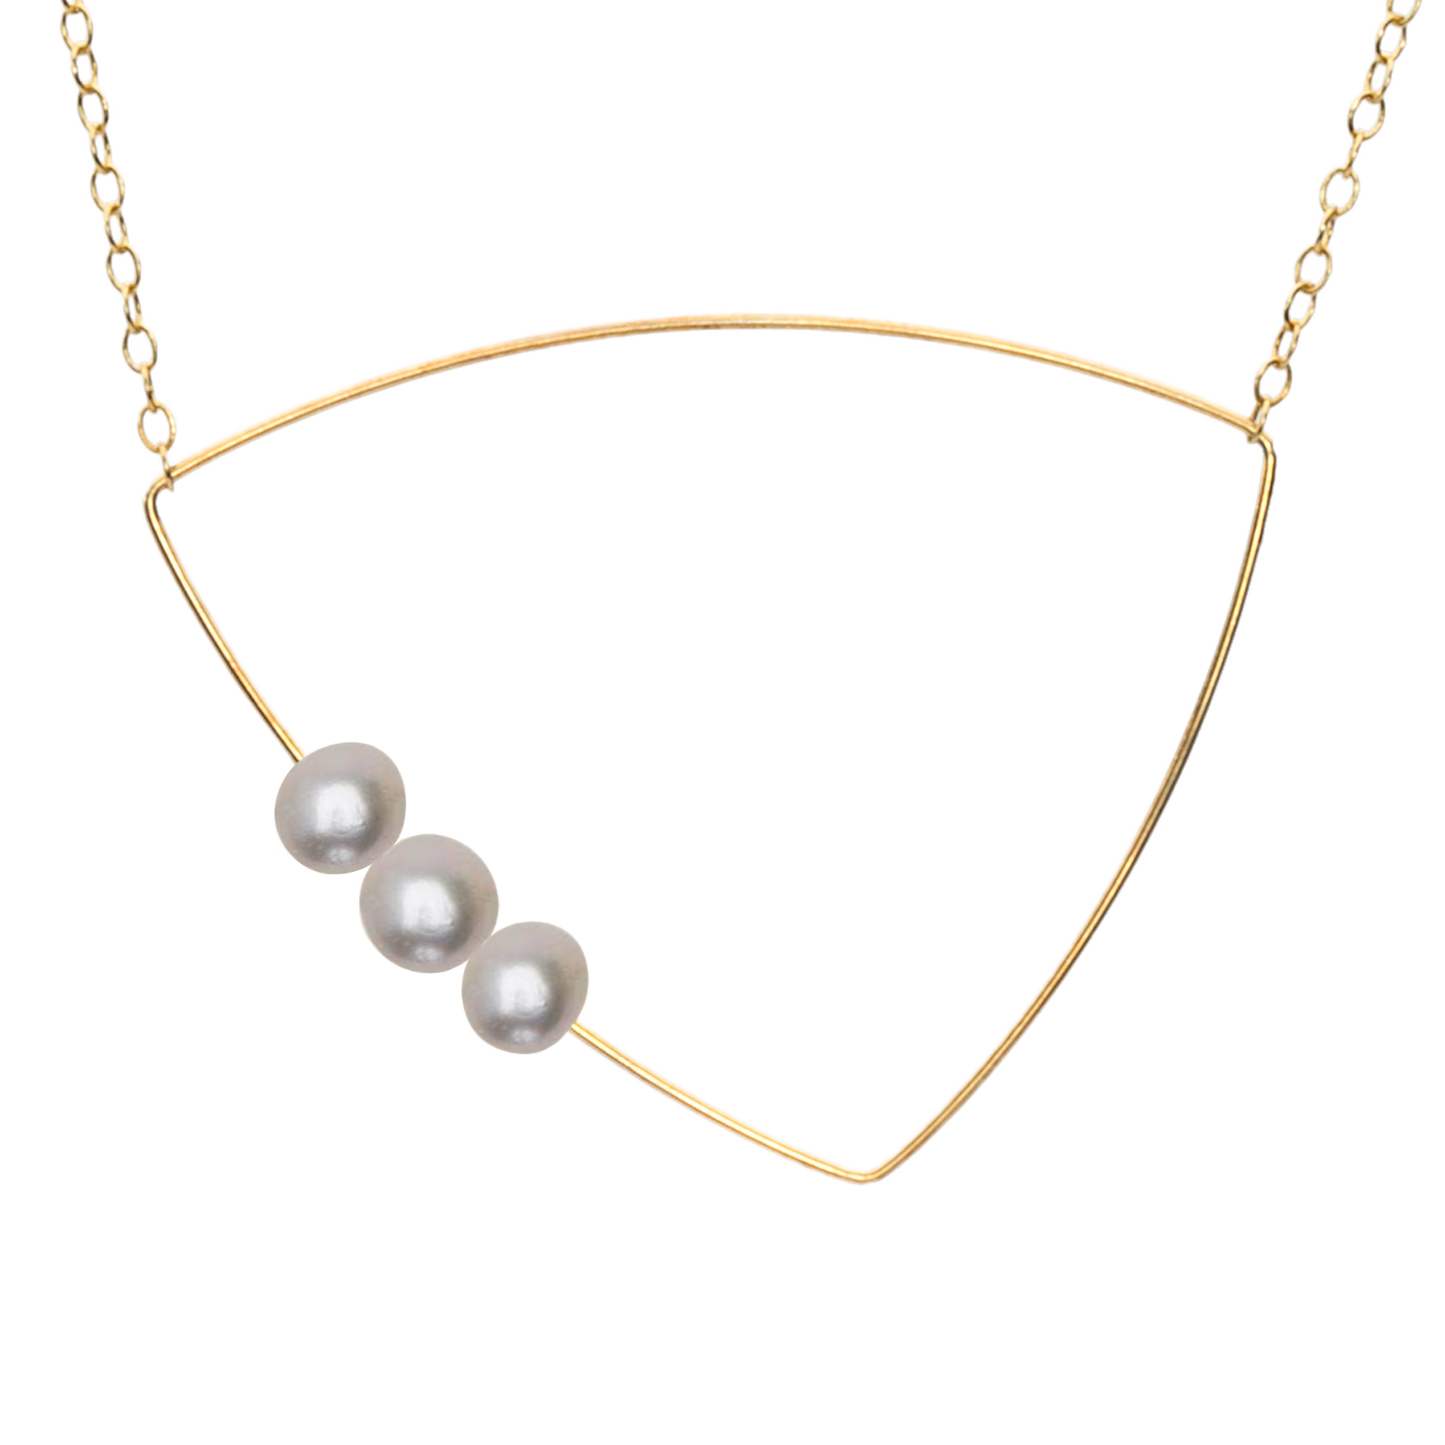 Triangle Pendant Necklace with Round Freshwater Pearls